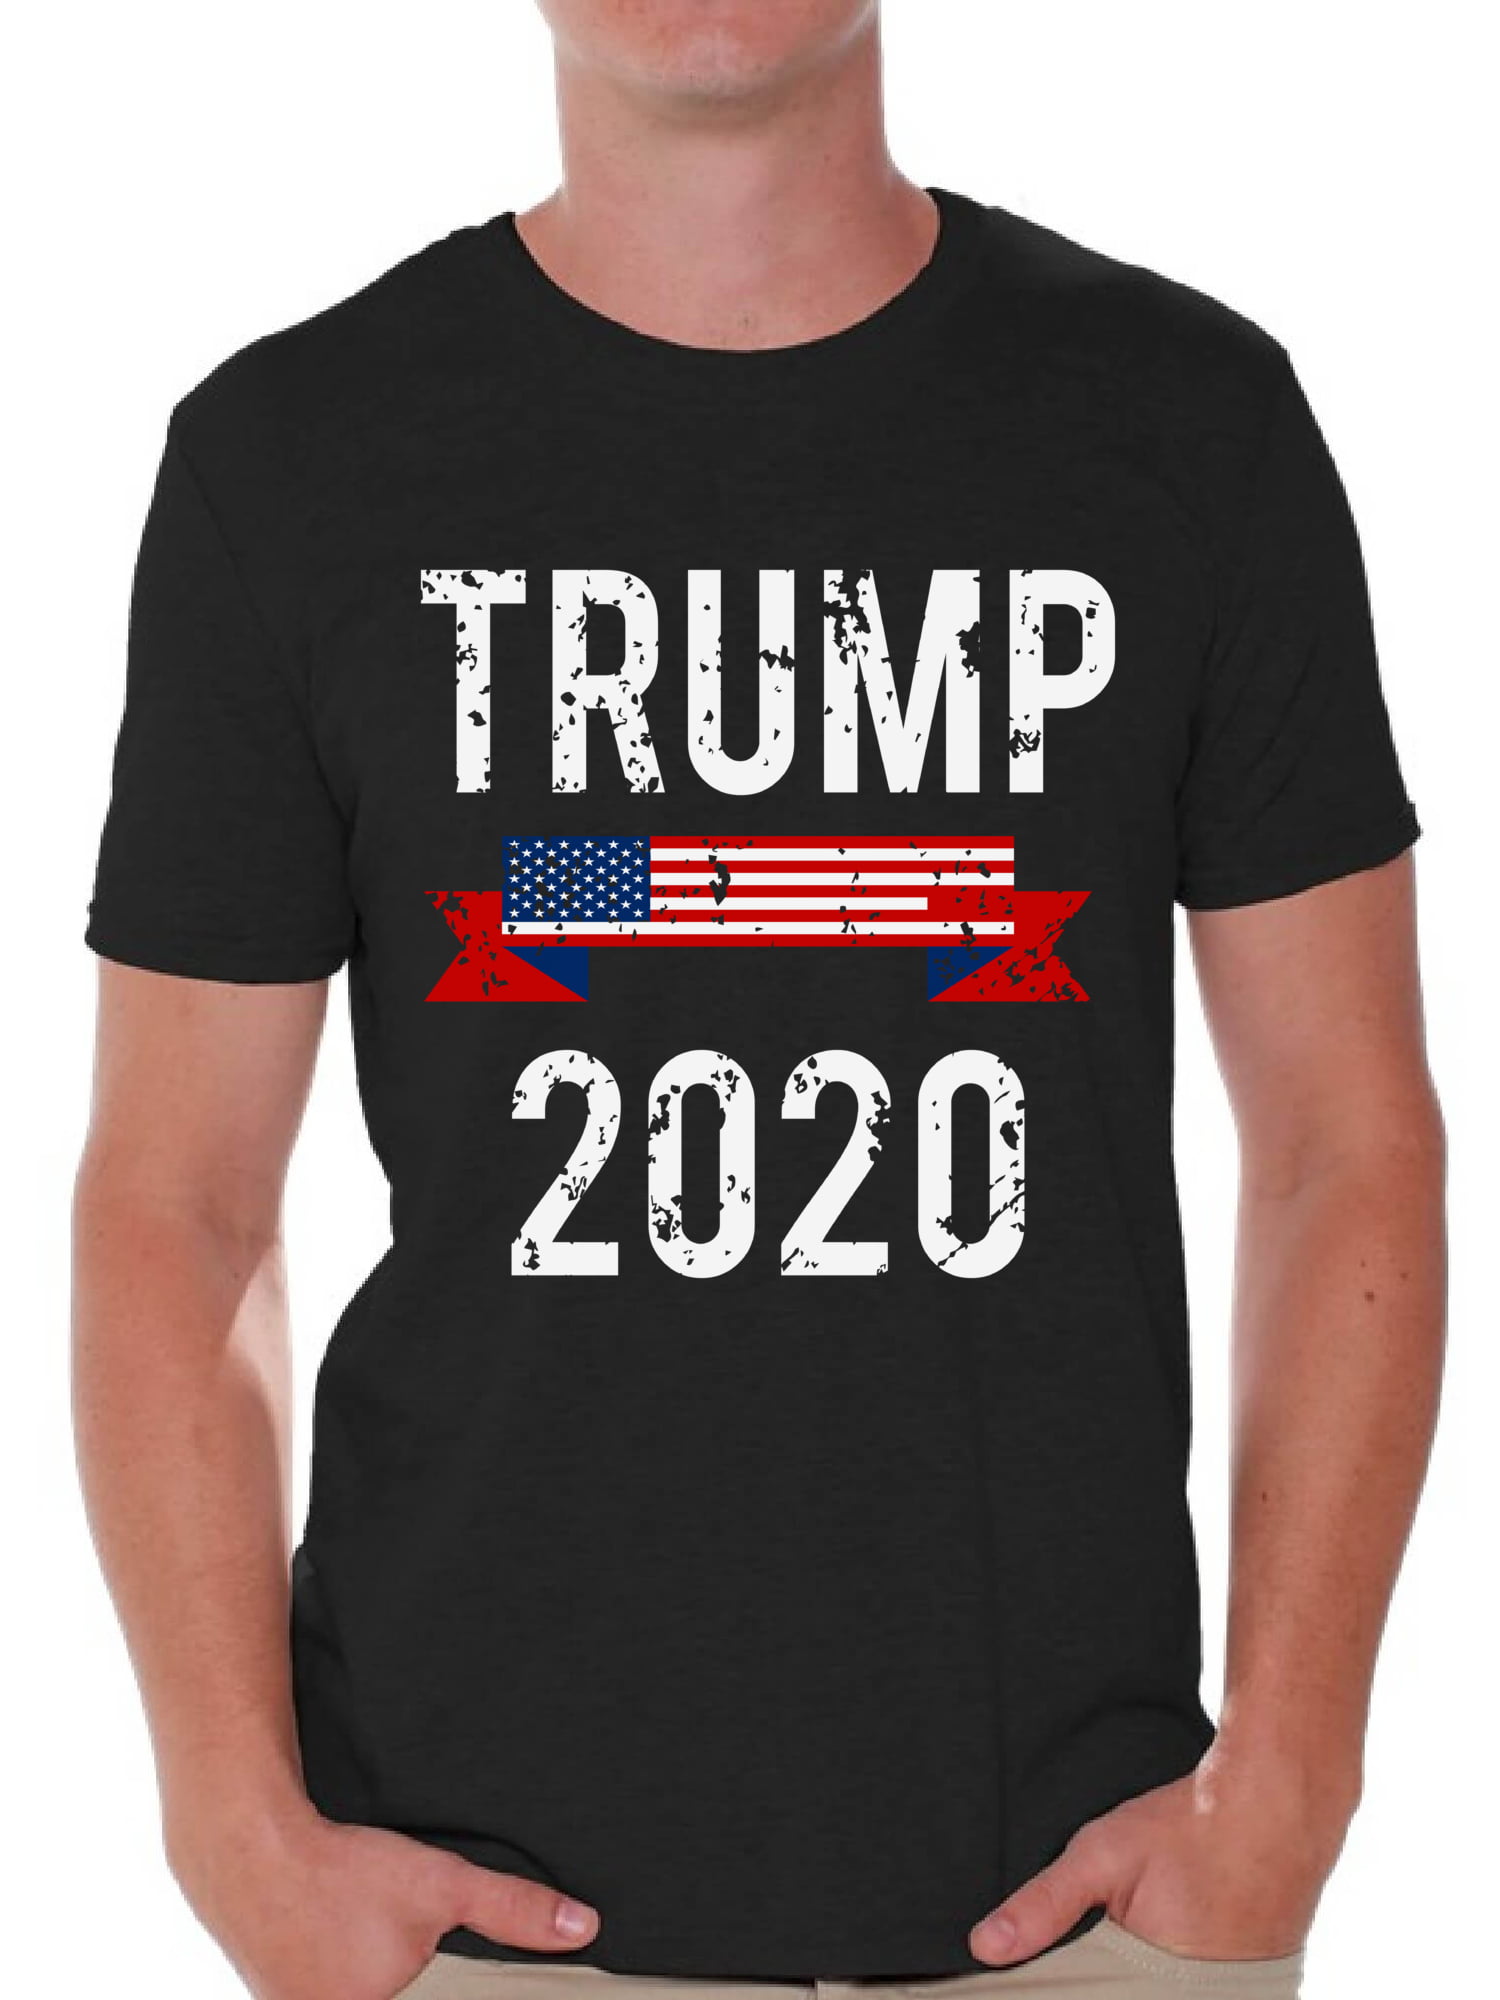 Derfor Utilgængelig sø Awkward Styles Trump 2020 Shirt Funny Trump Gifts for Men Republican Tshirt  Patriotic Gifts Keep America Great USA Trump T Shirt Mr. President Shirt  Donald Trump T Shirt Political Shirts for Men -